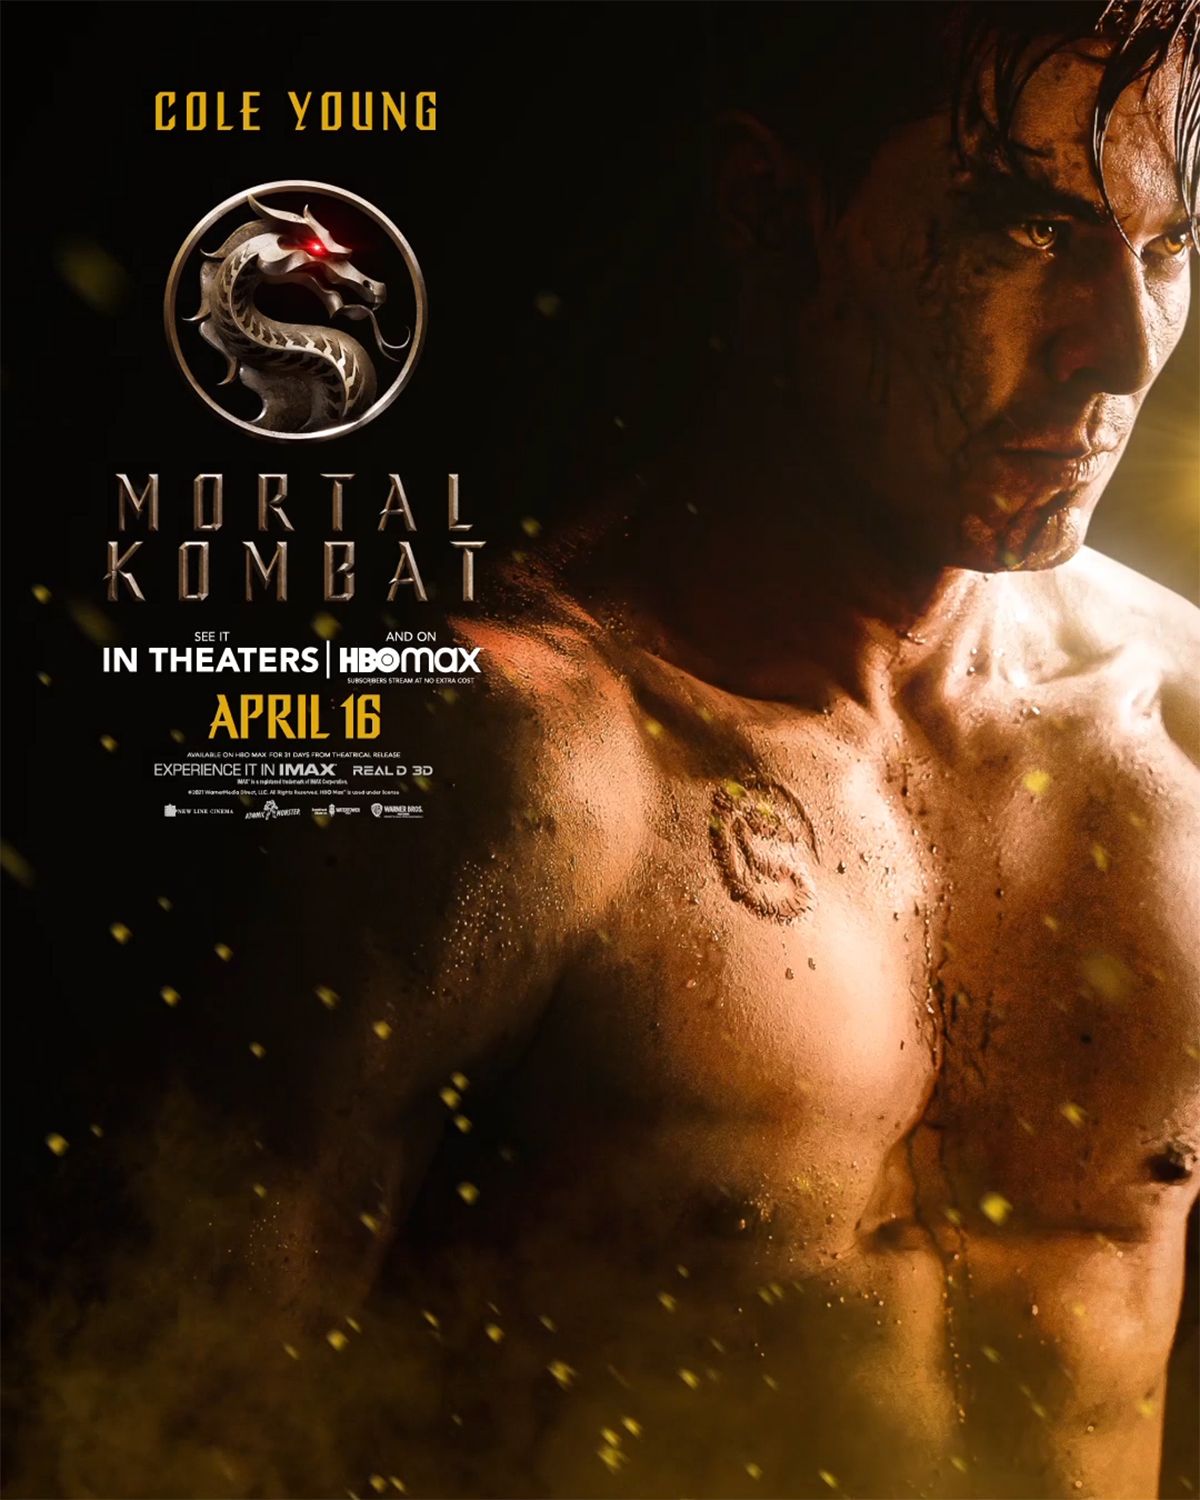 Cole Young character poster for Mortal Kombat movie